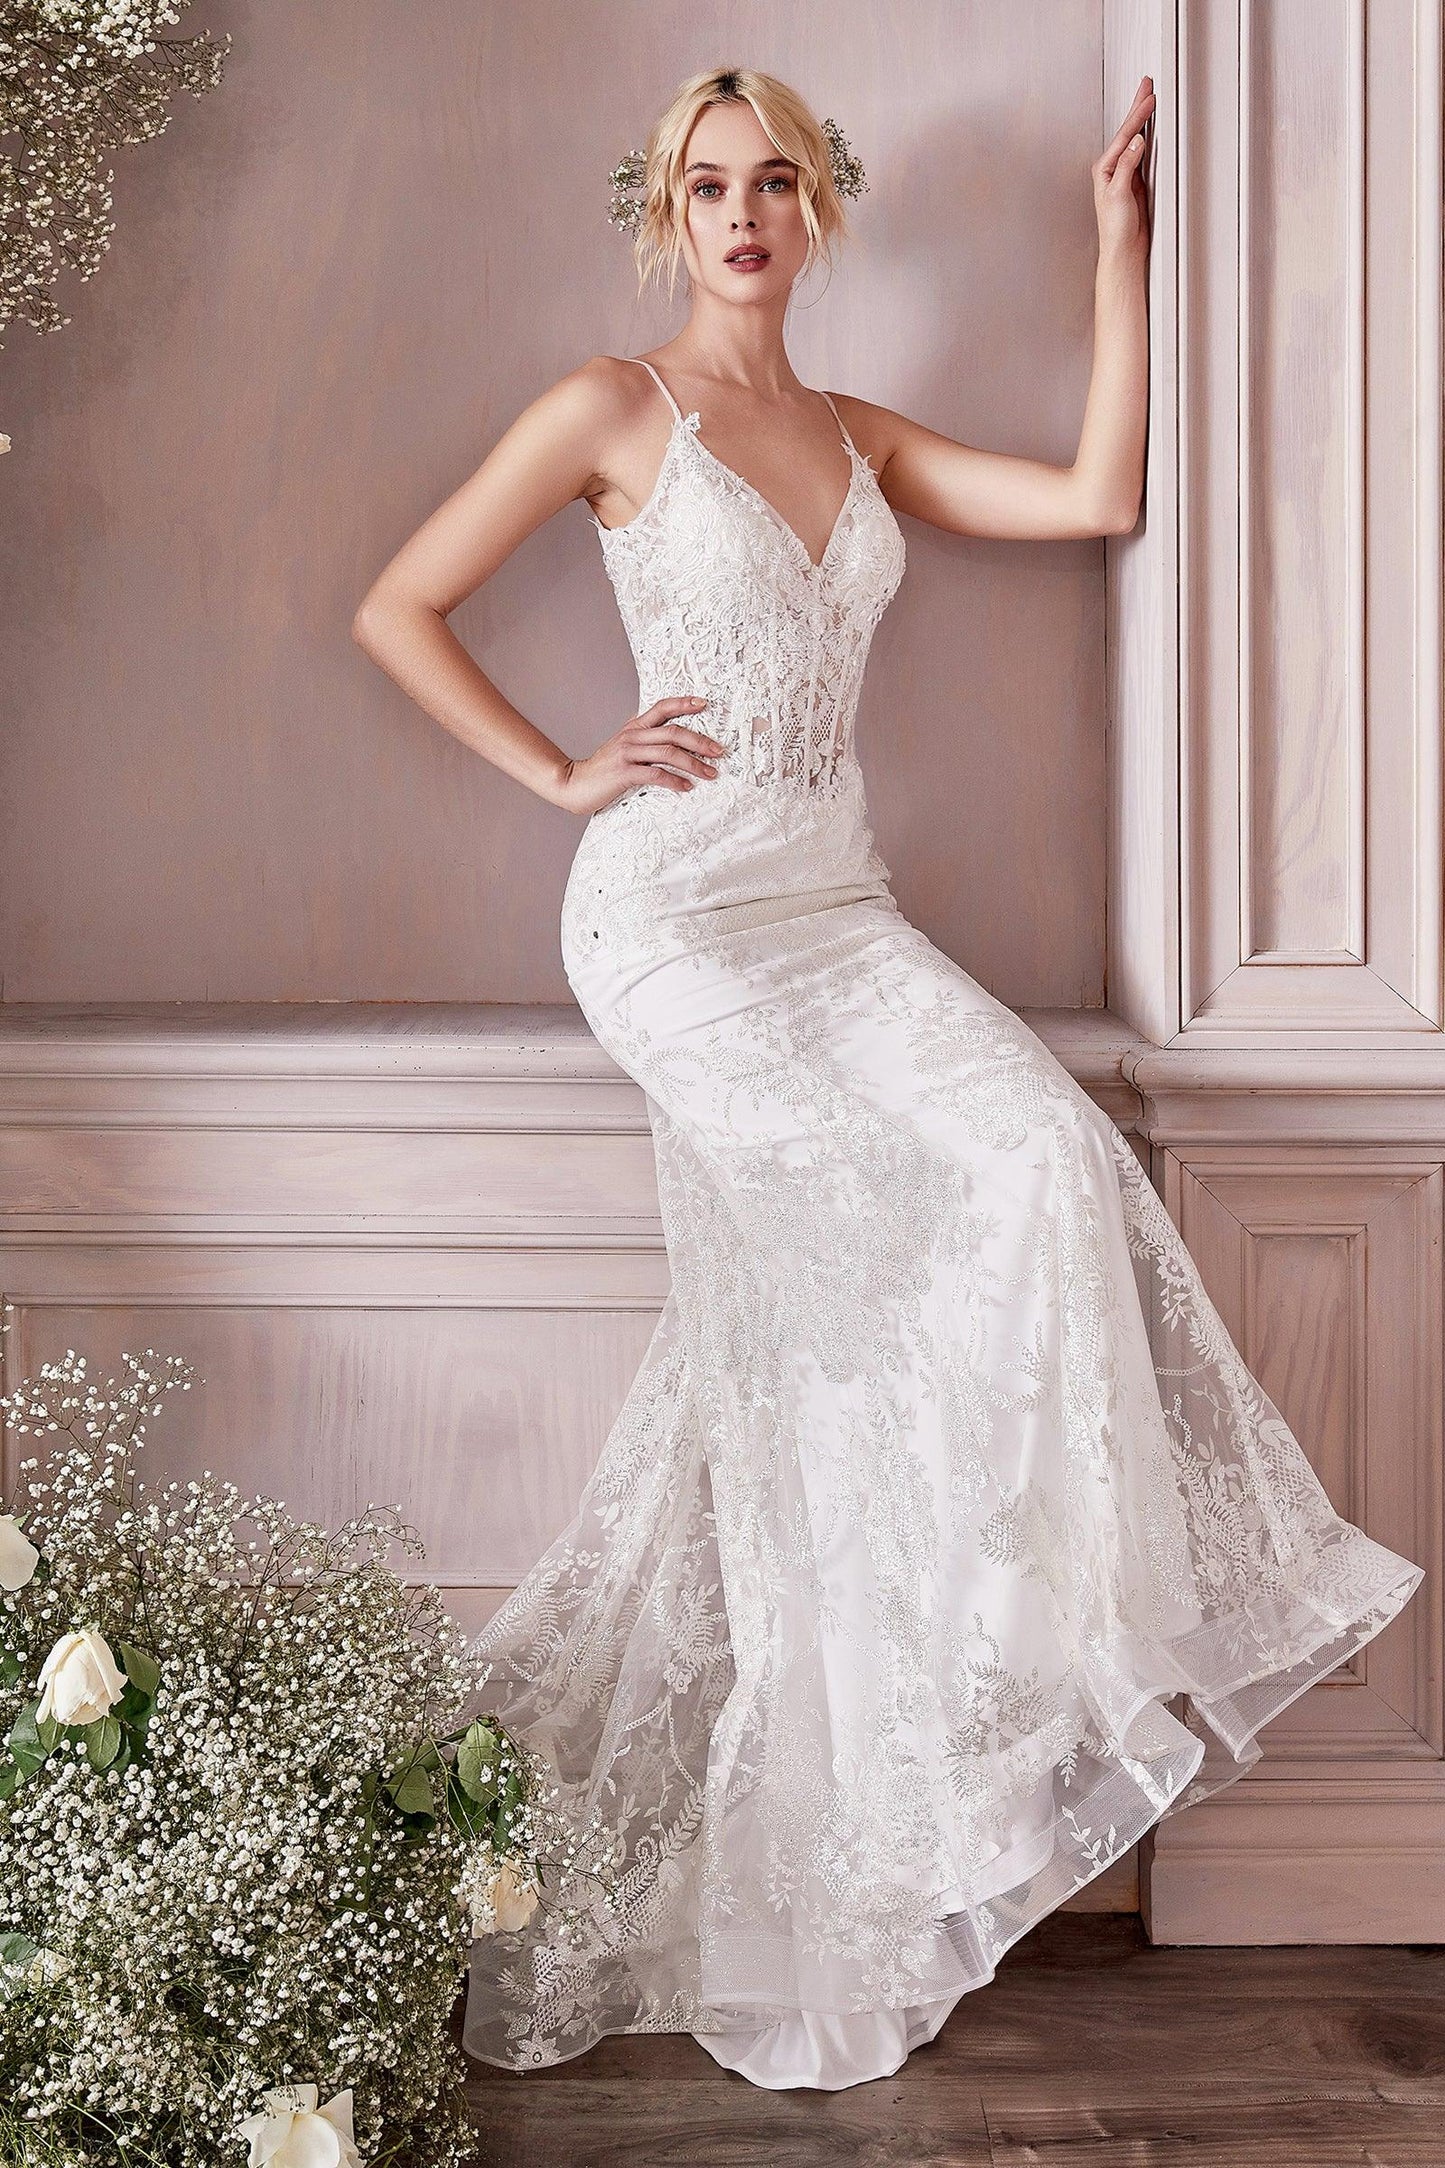 Spaghetti Strap Long Lace Wedding Dress - The Dress Outlet